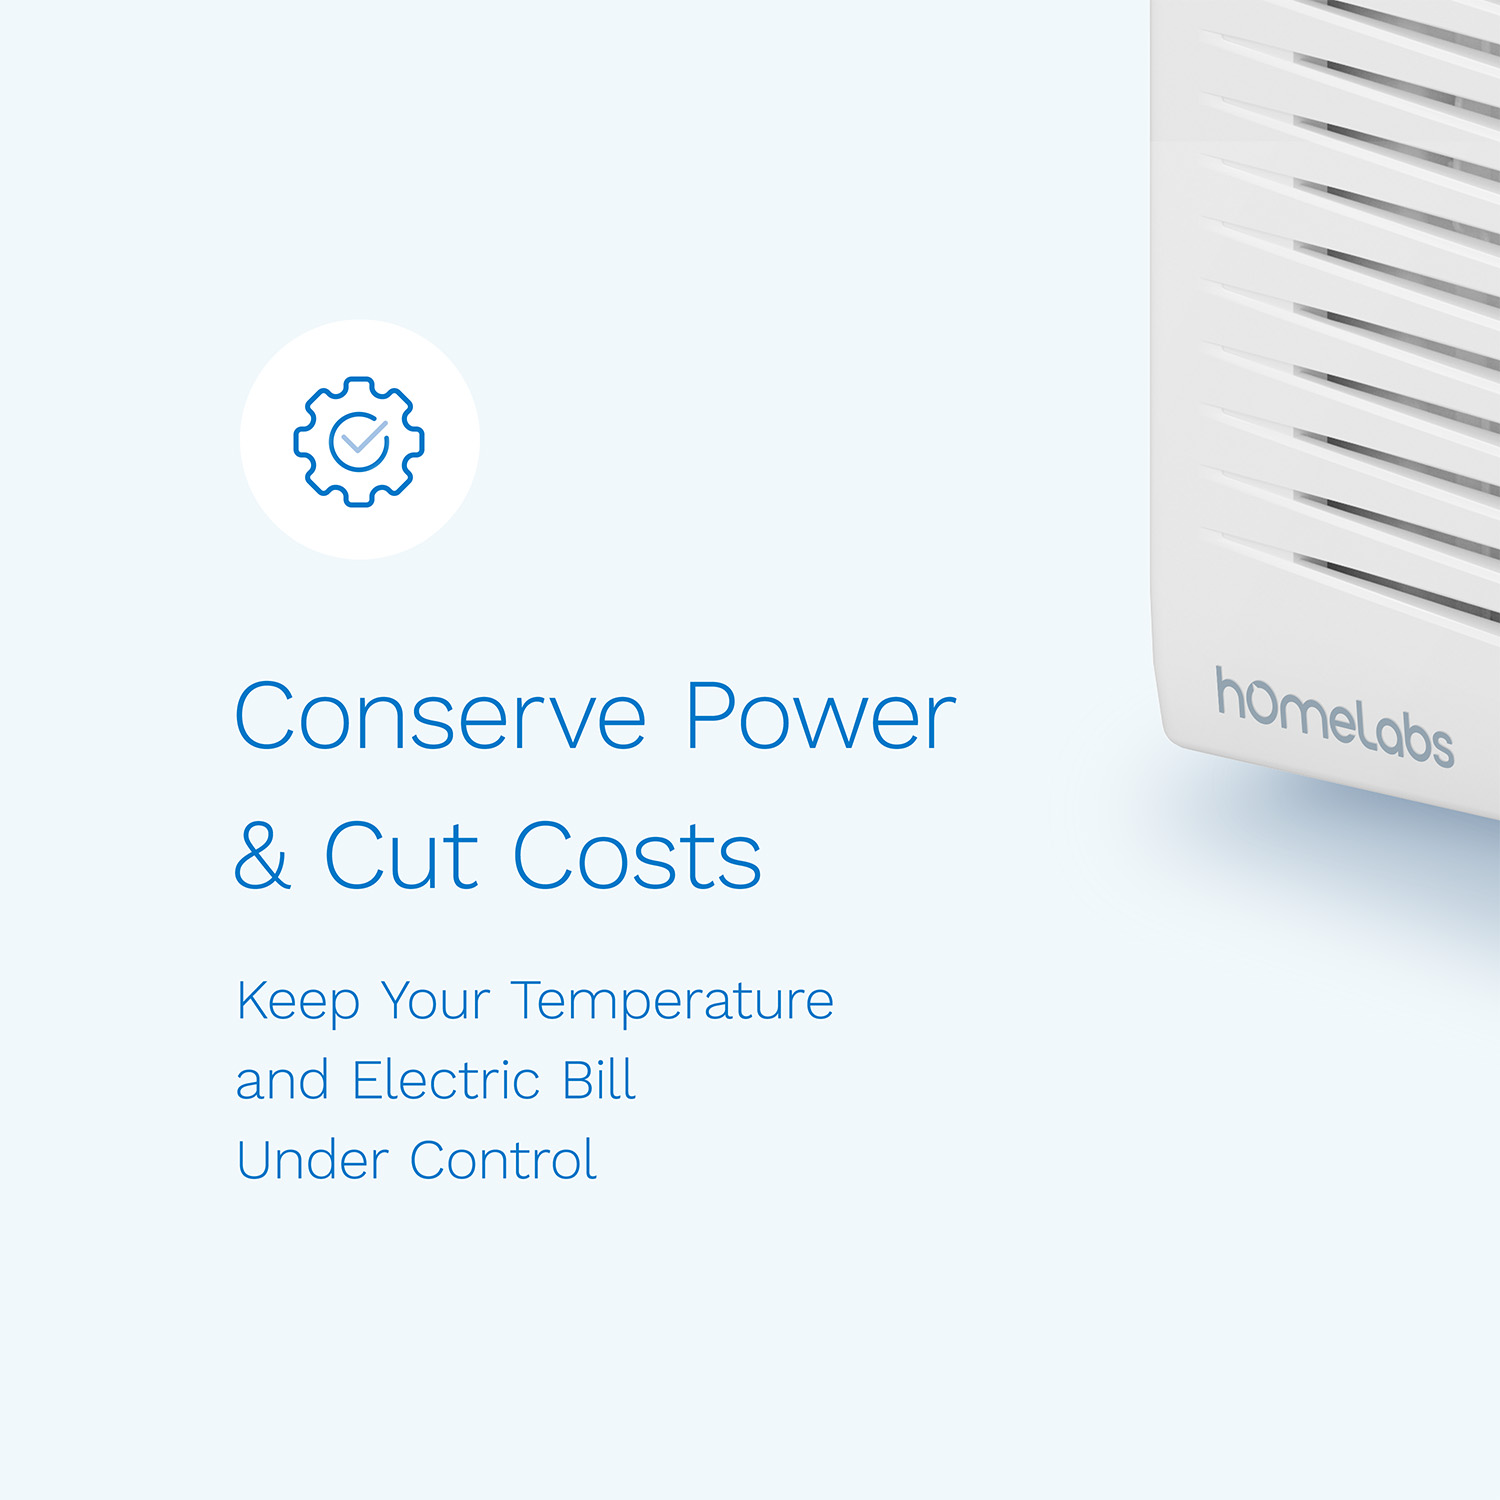 hOmeLabs 12,000 BTU Window Air Conditioner - Energy efficient AC Unit with Digital Thermostat and Easy-to-Use Remote Control - Ideal for Rooms up to 550 Square Feet - image 4 of 10